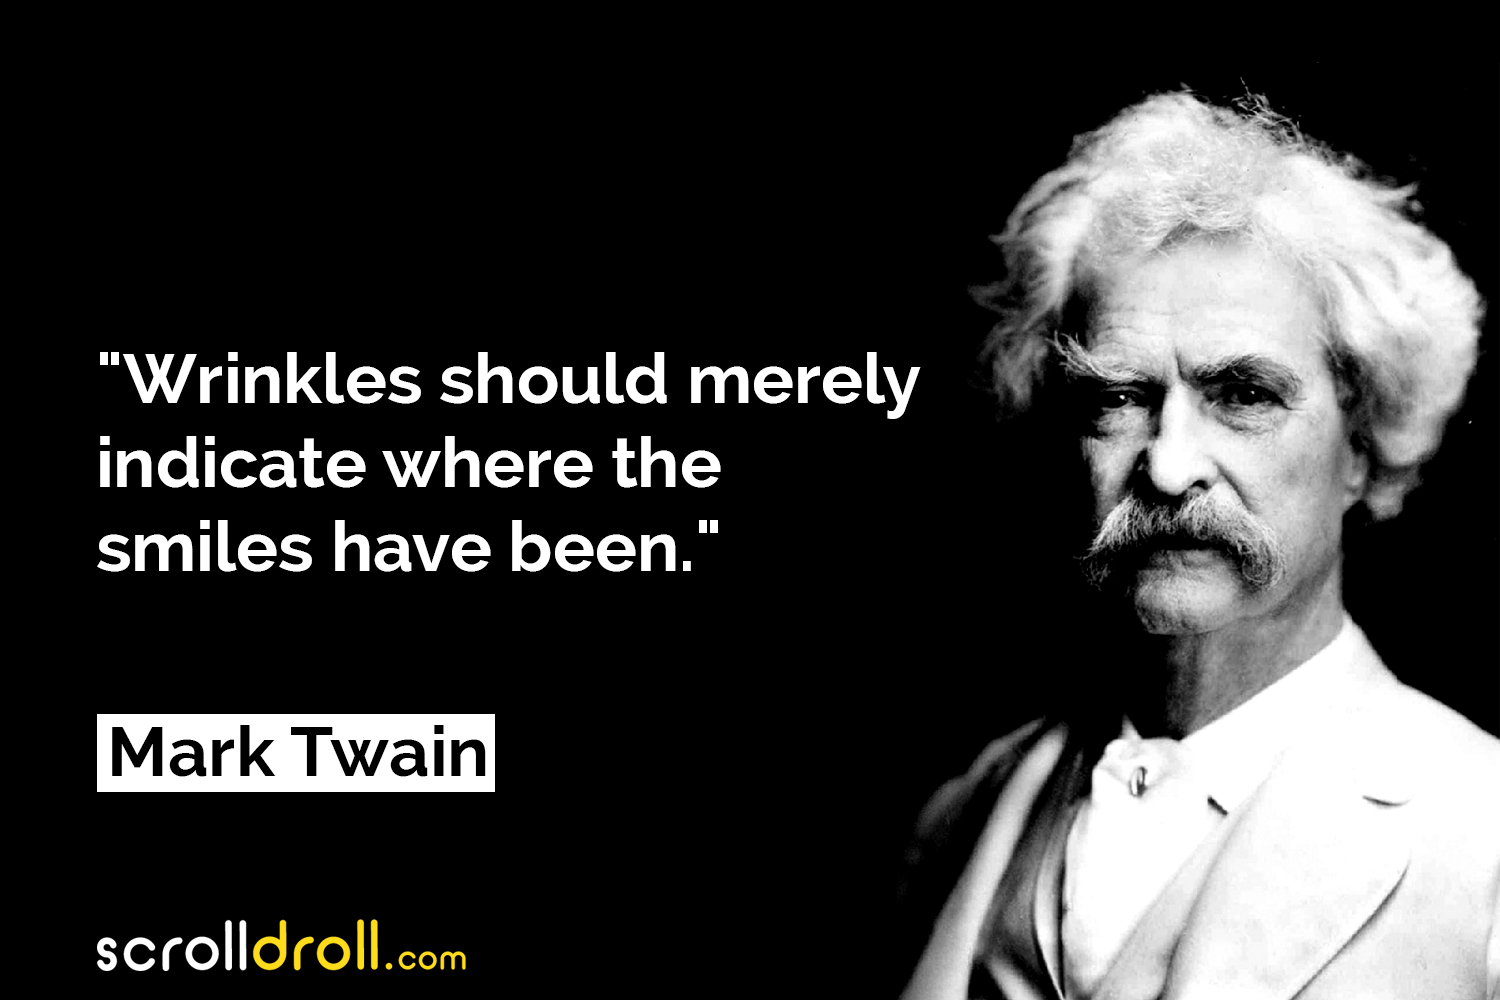 20 Best Mark Twain Quotes Full Of Wit, Inspiration, Humor & Life Lessons